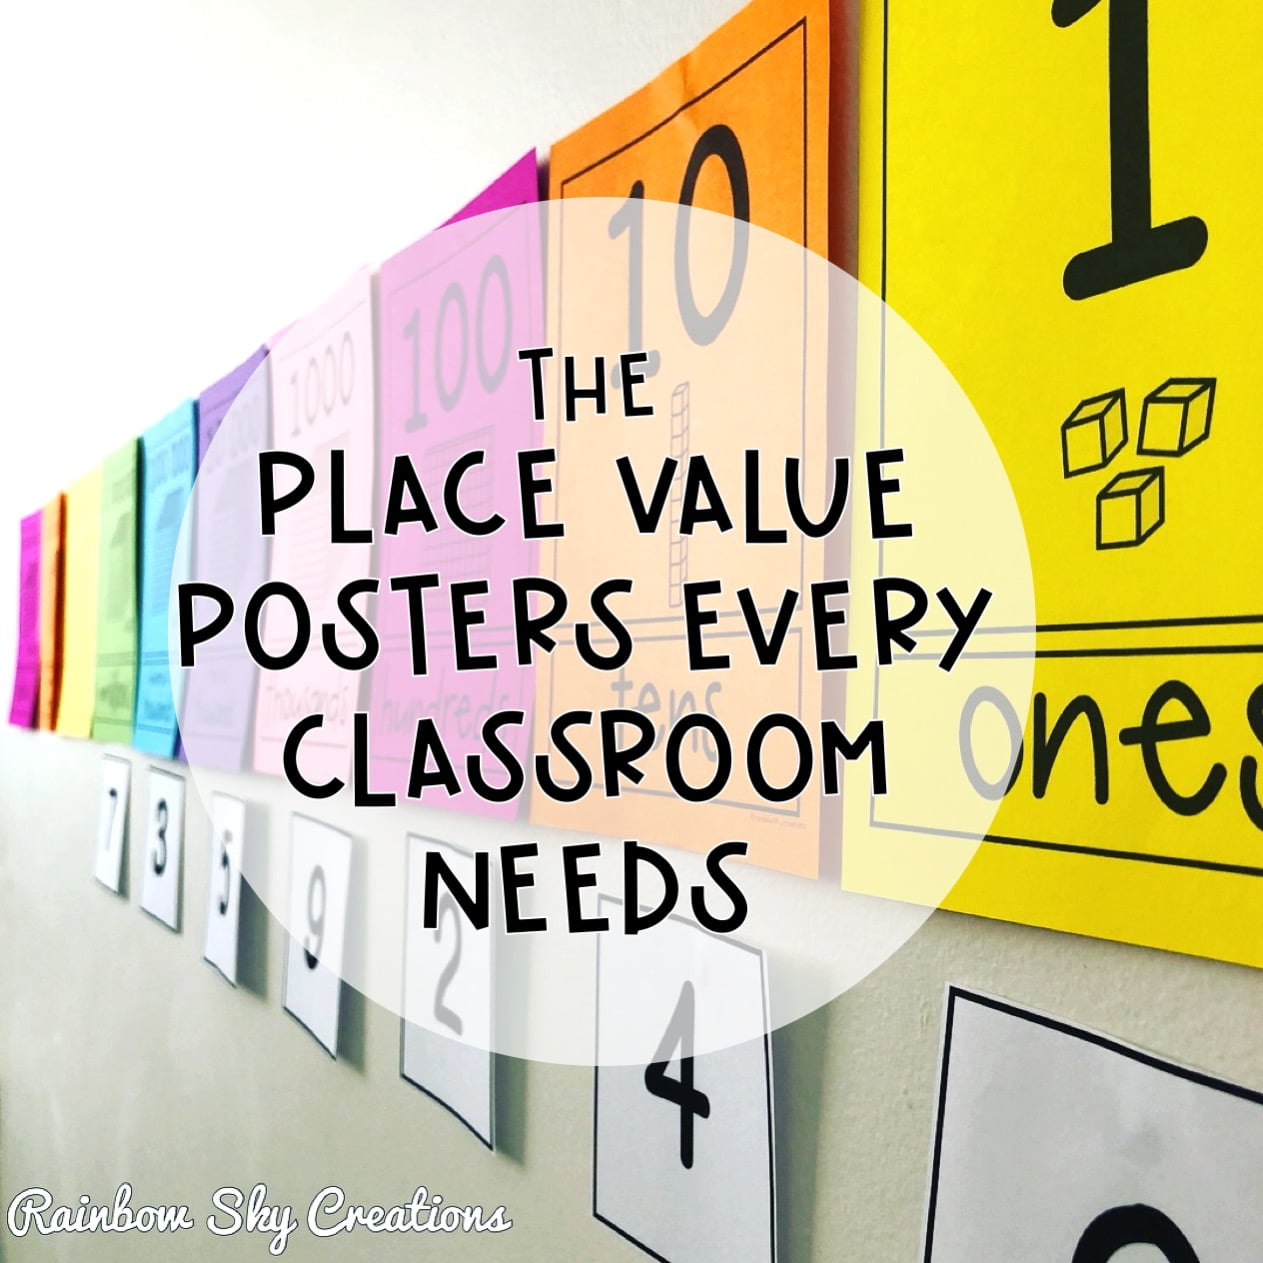 the-place-value-posters-every-classroom-needs-rainbow-sky-creations